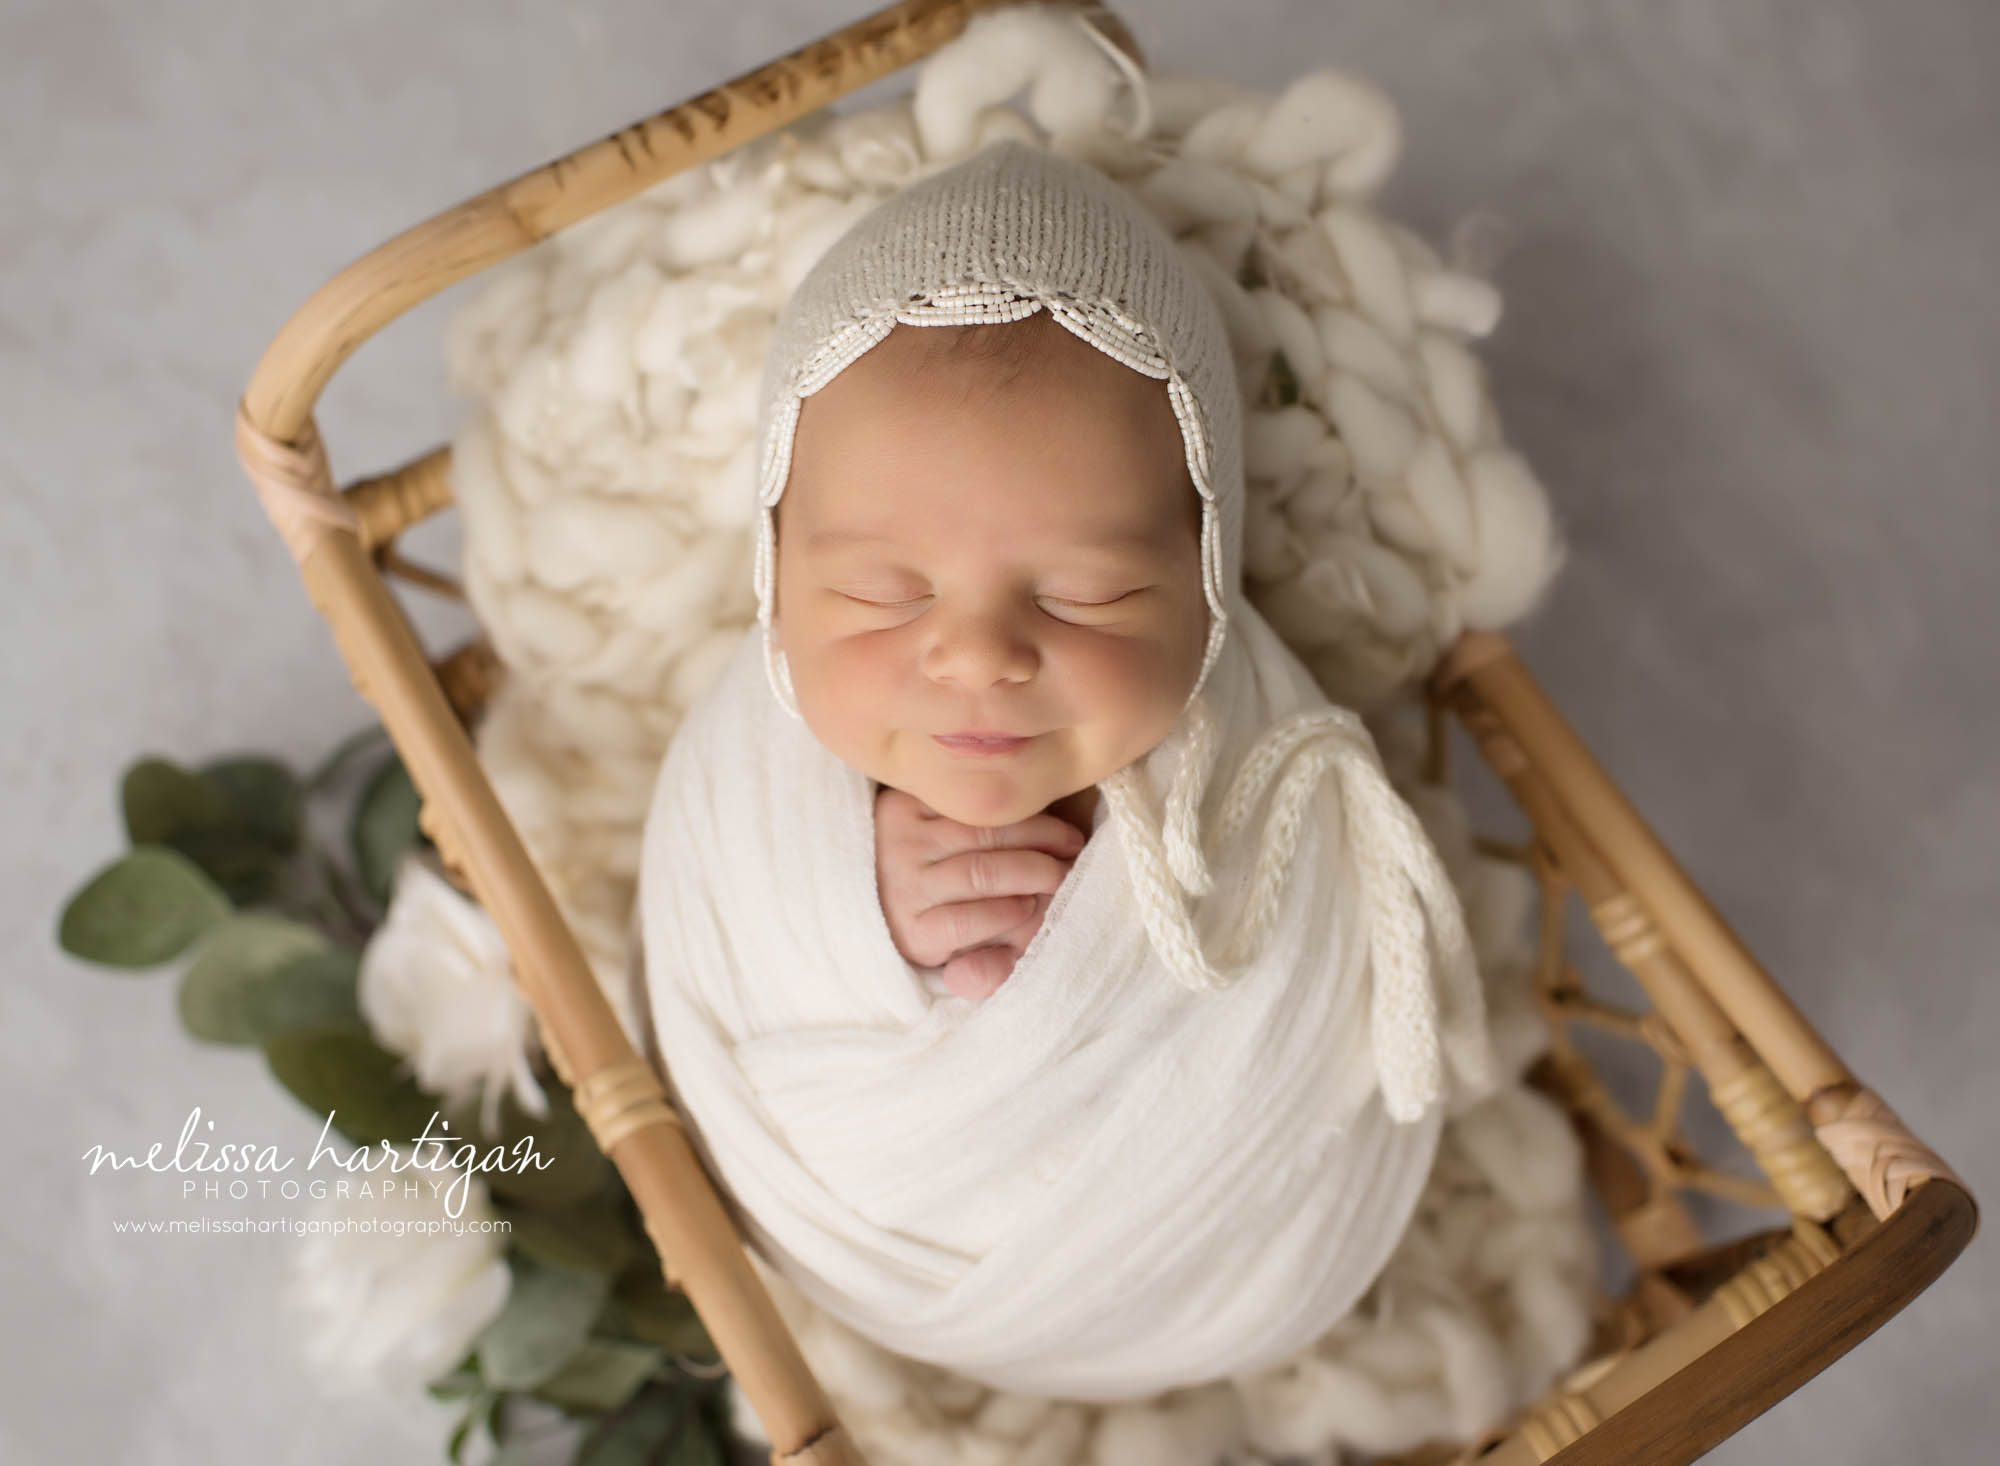 newborn baby girl wrapped in ivory wrap wearing knitted bonnet with beads newborn photography windsor CT